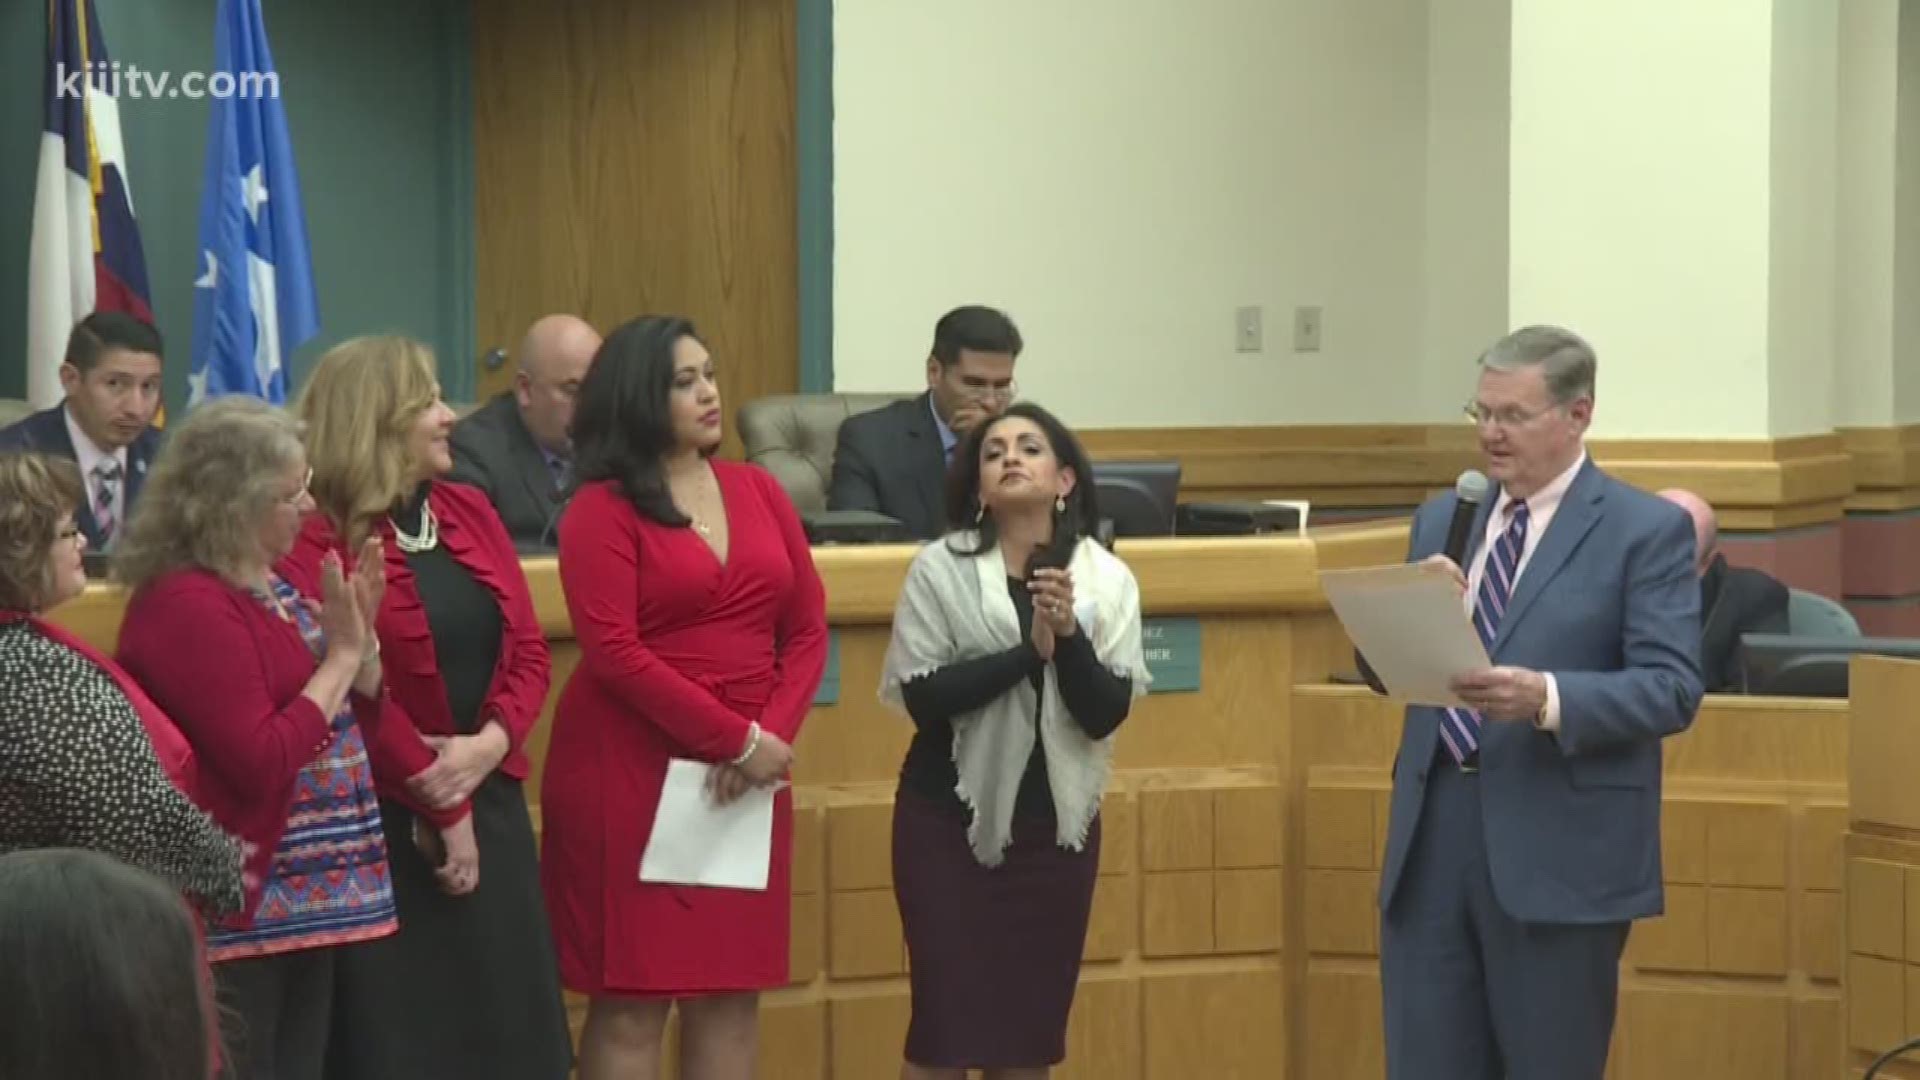 During Tuesday's regular meeting, Corpus Christi's City Council proclaimed April 2 as National Equal Pay Day.